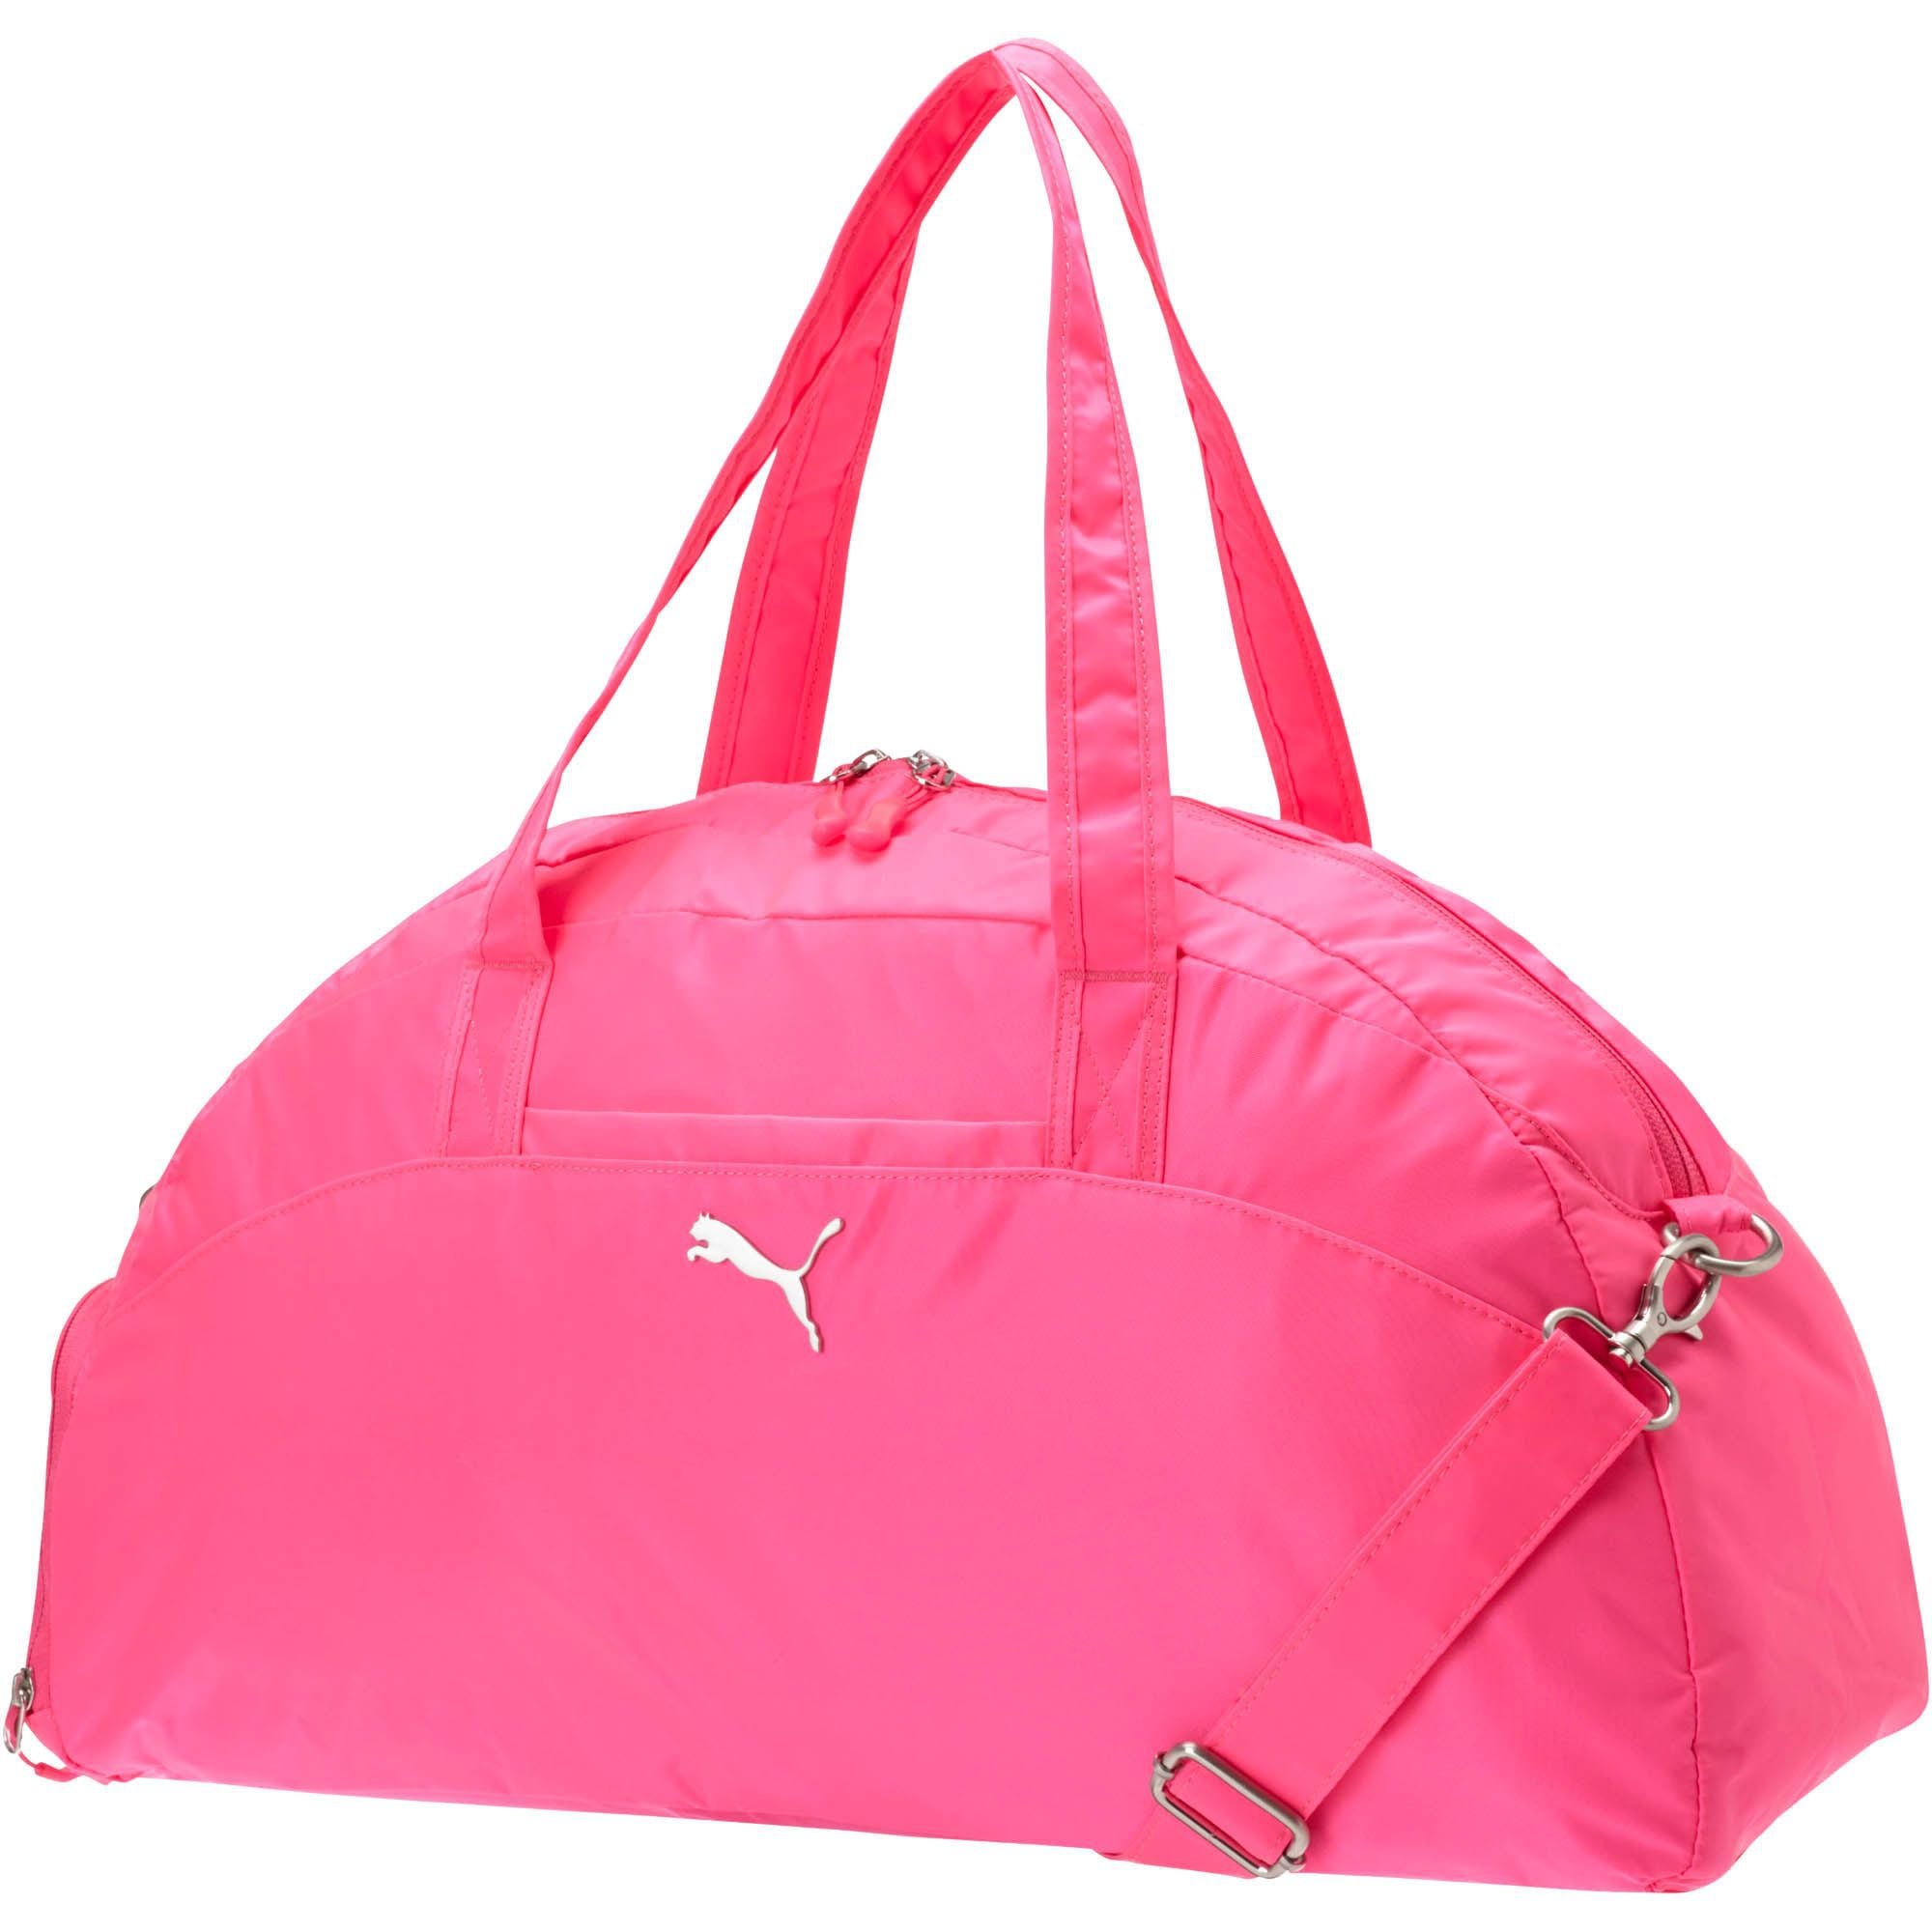 Cute Gym Bags For Women 2018